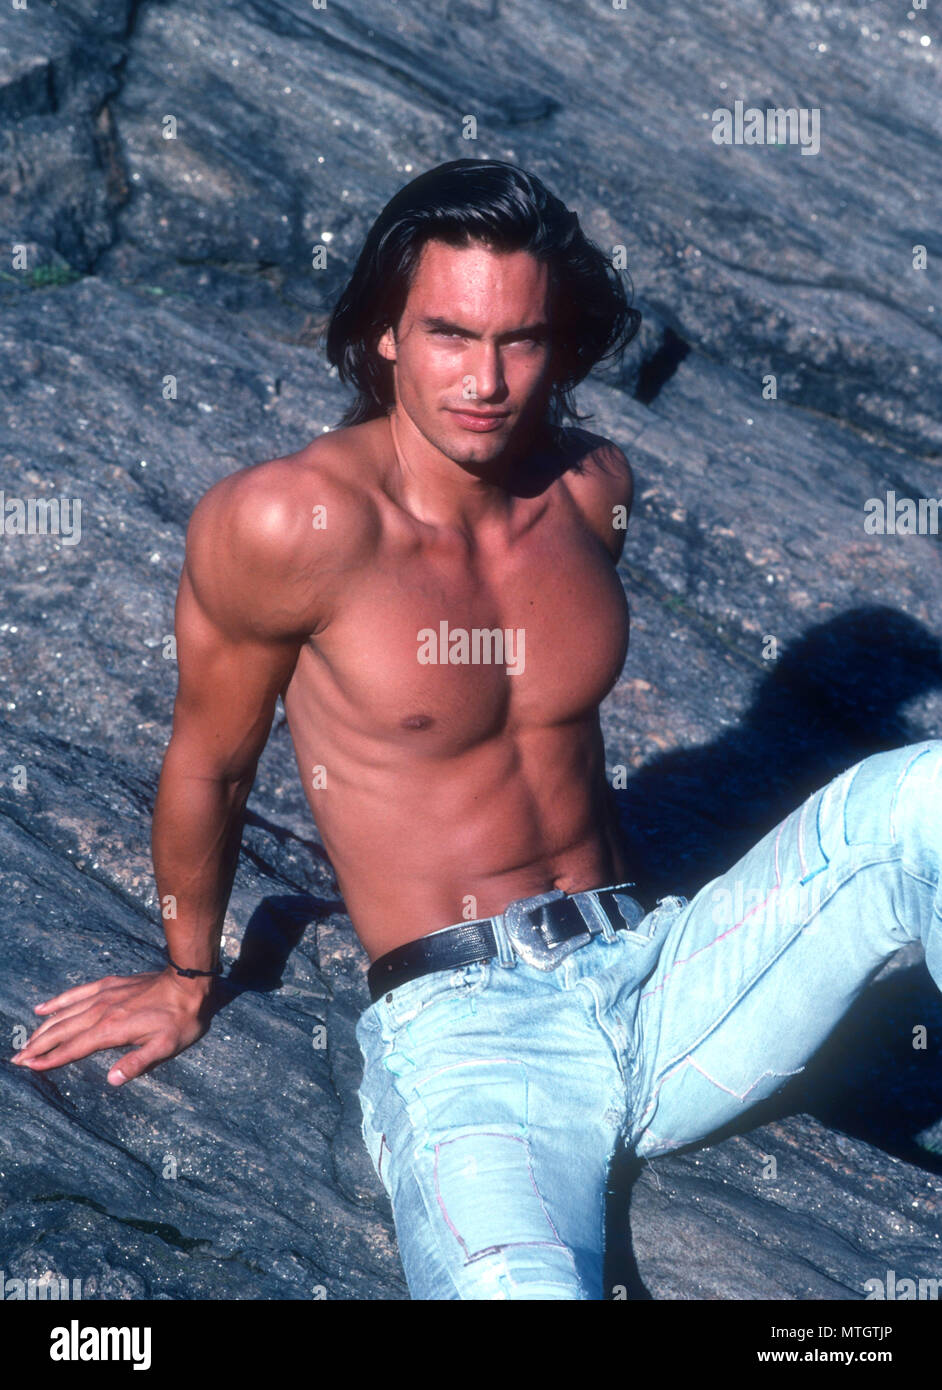 NEW YORK, NY - JUNE 14: (EXCLUSIVE) Model Marcus Schenkenberg poses during a photo shoot on June 14, 1991 in New York City, New York. Photo by Barry King/Alamy Stock Photo Stock Photo